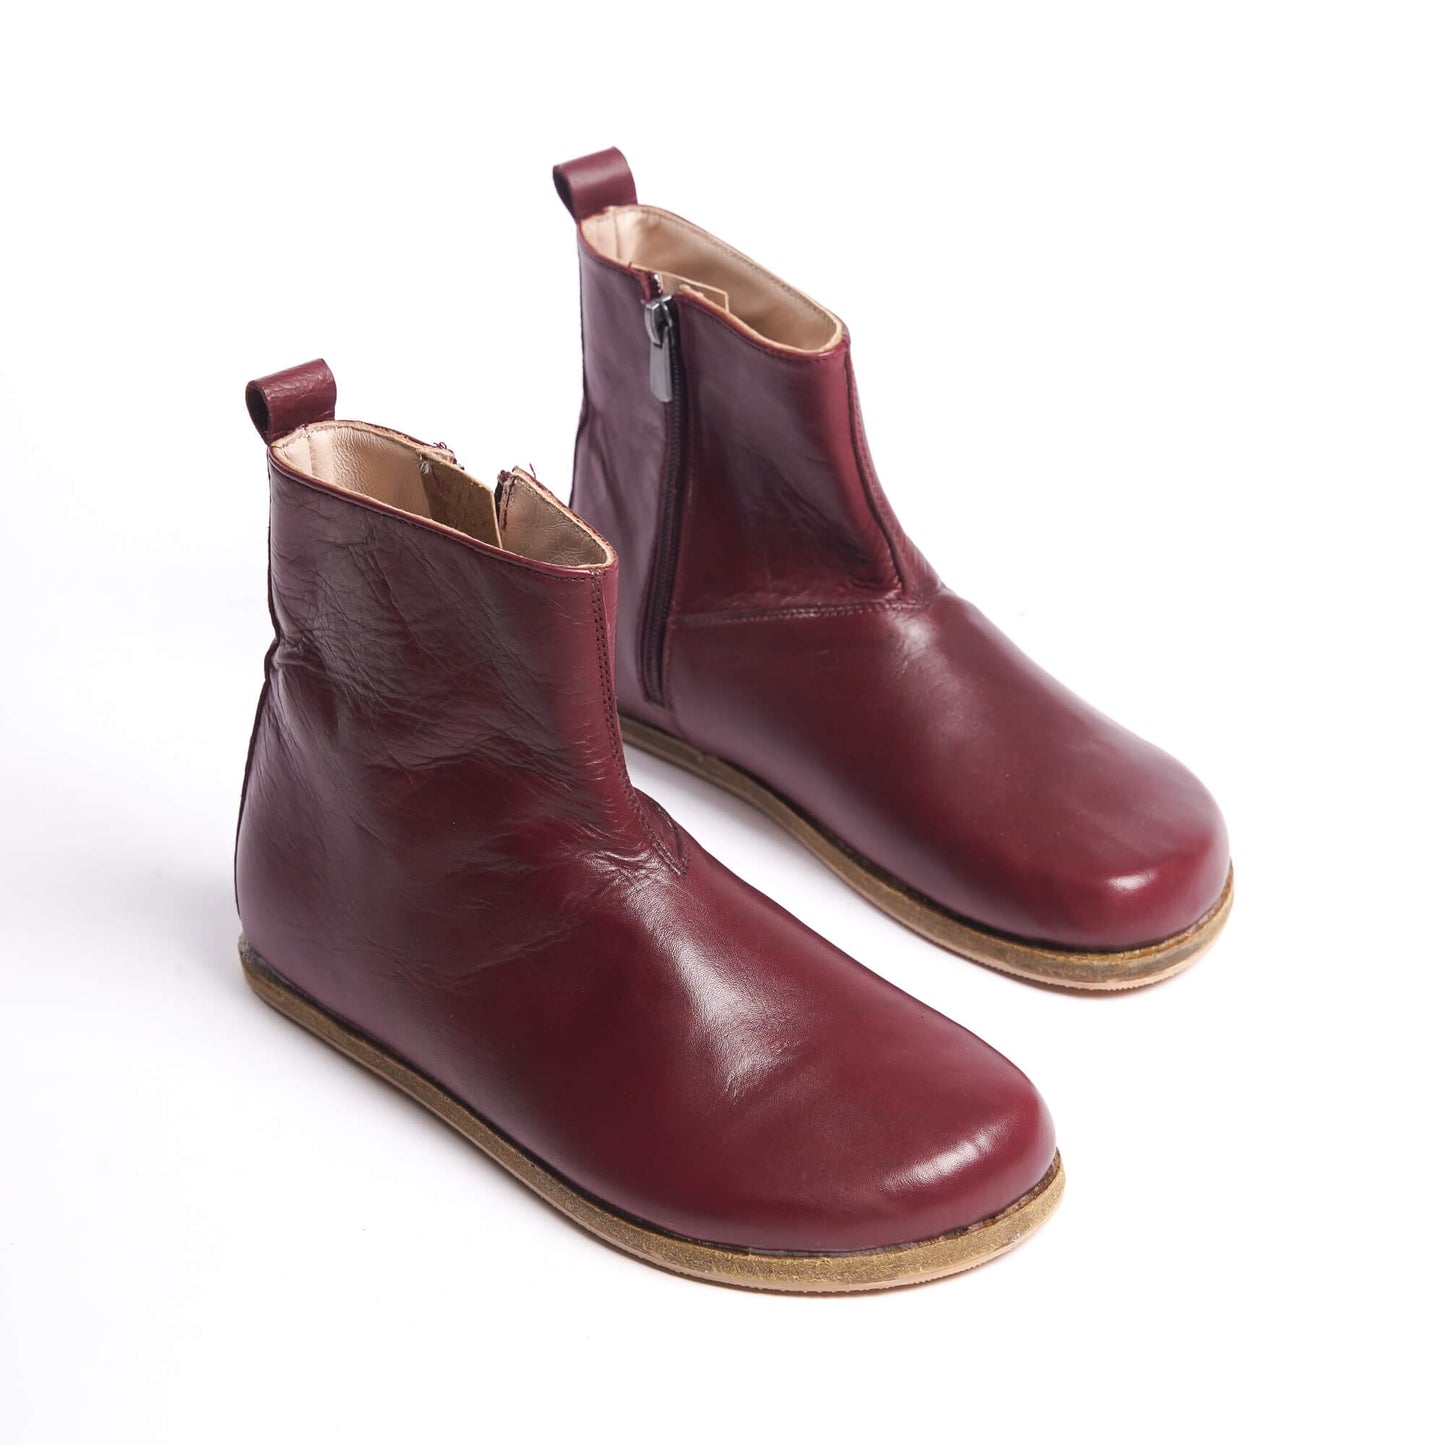 Burgundy women’s boots with a wide toe box and ergonomic soles. Minimalist design perfect for earthing shoes.